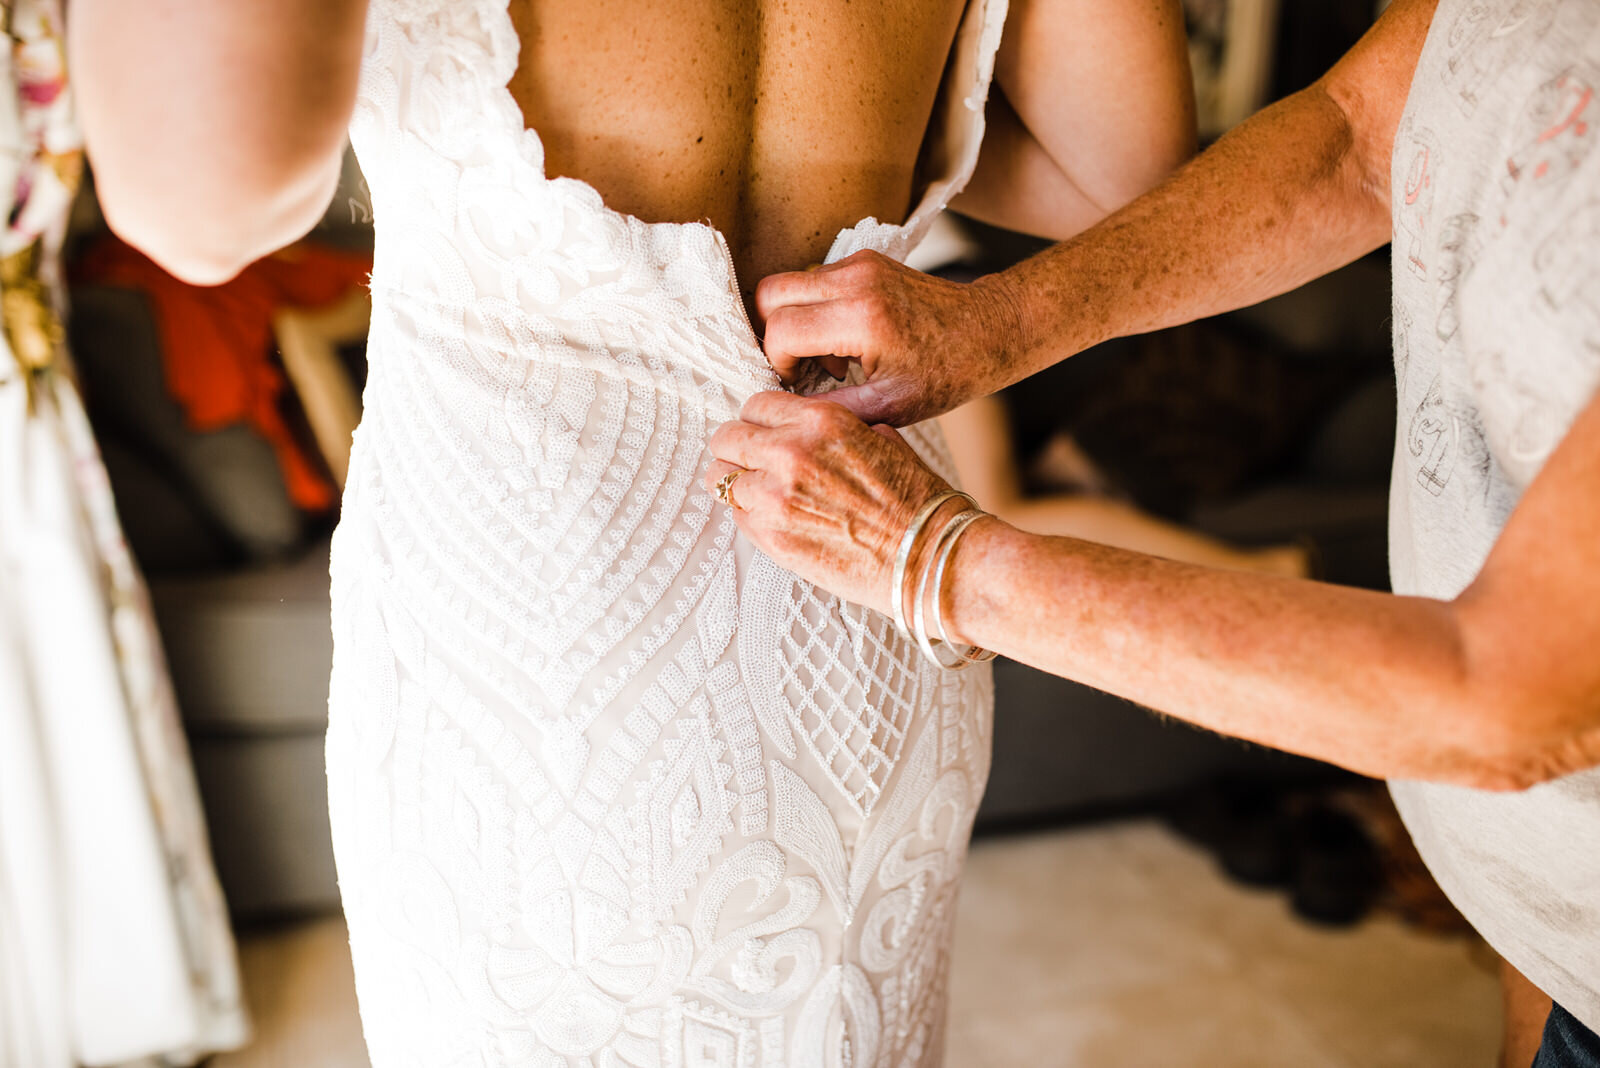 Bride getting ready at Houdini Estate - Mom zipping Blush by Hayley Paige Wedding Dress | Candid, documentary wedding photos by LA Wedding Photographer Kept Record | www.keptrecord.com